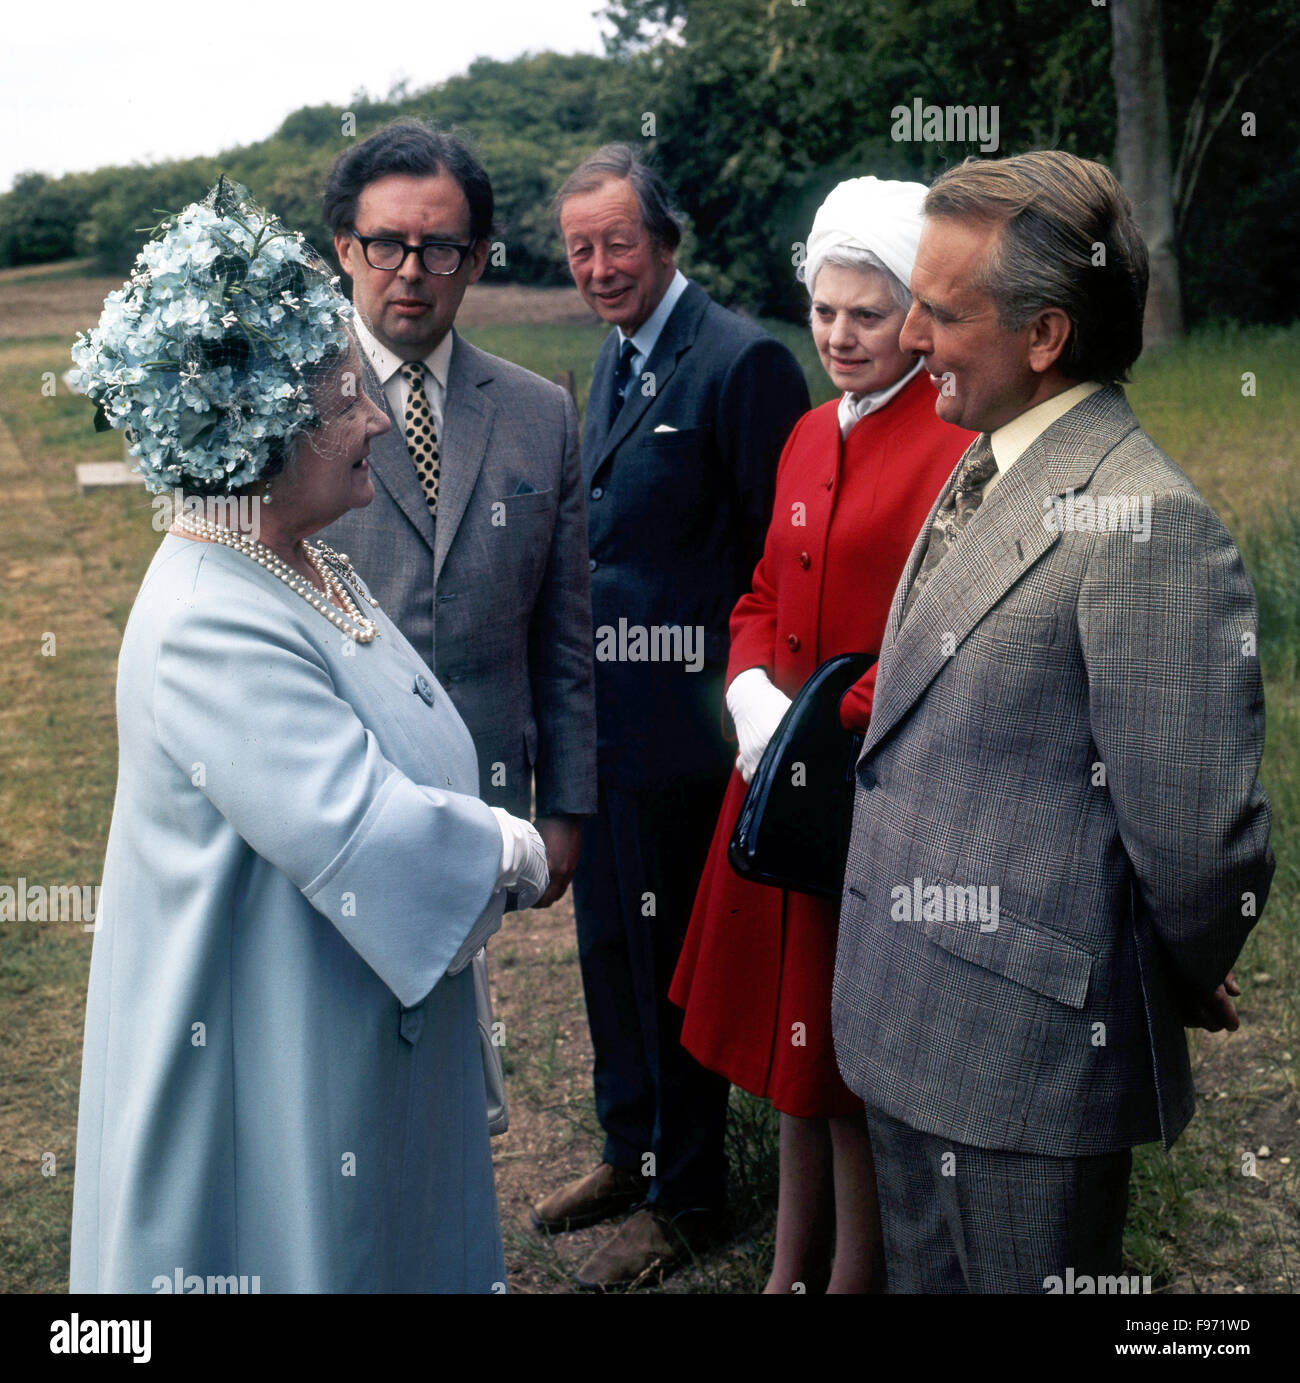 The Upper Avon canal was officially reopened by HM Queen Elizabeth the Queen Mother on June 1st 1974. With her are Robert Aickman (left) and David Hutchings (right). Stock Photo